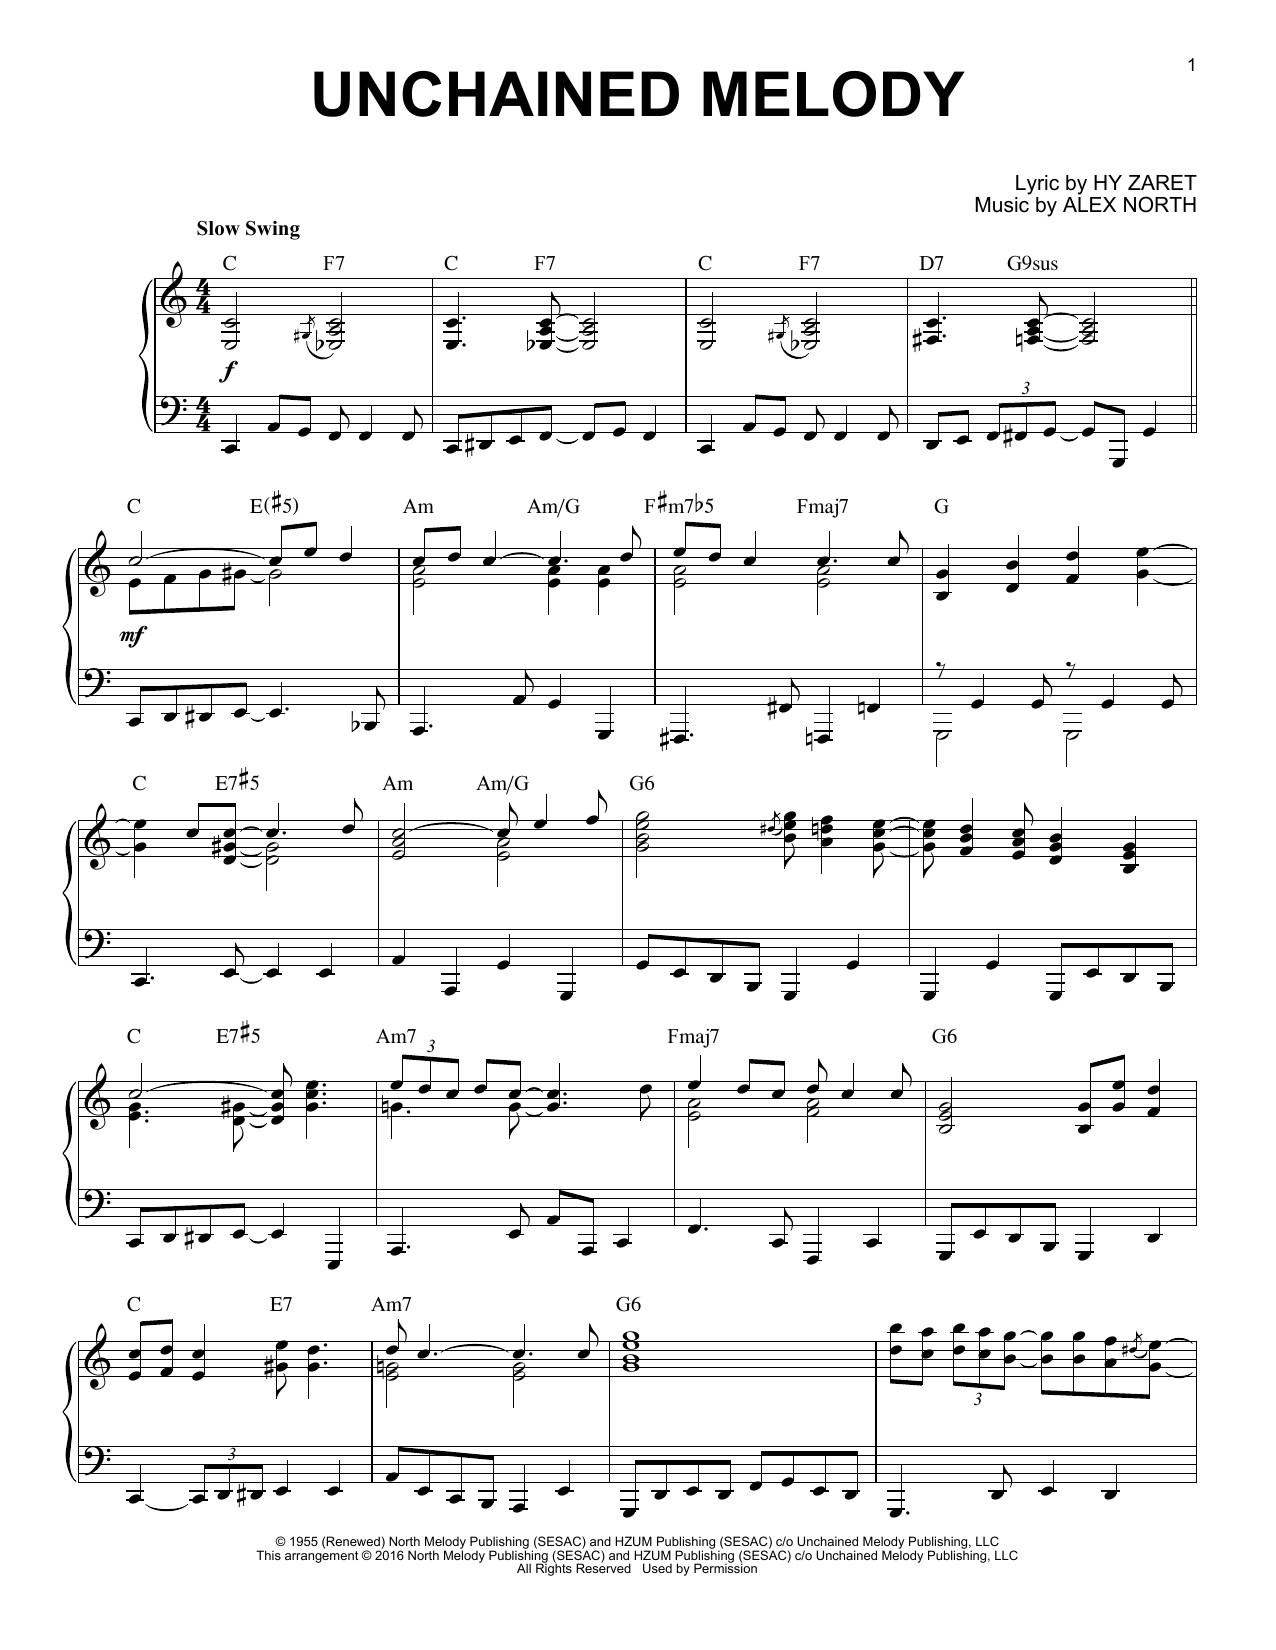 Unchained Melody sheet music for voice and piano (PDF)